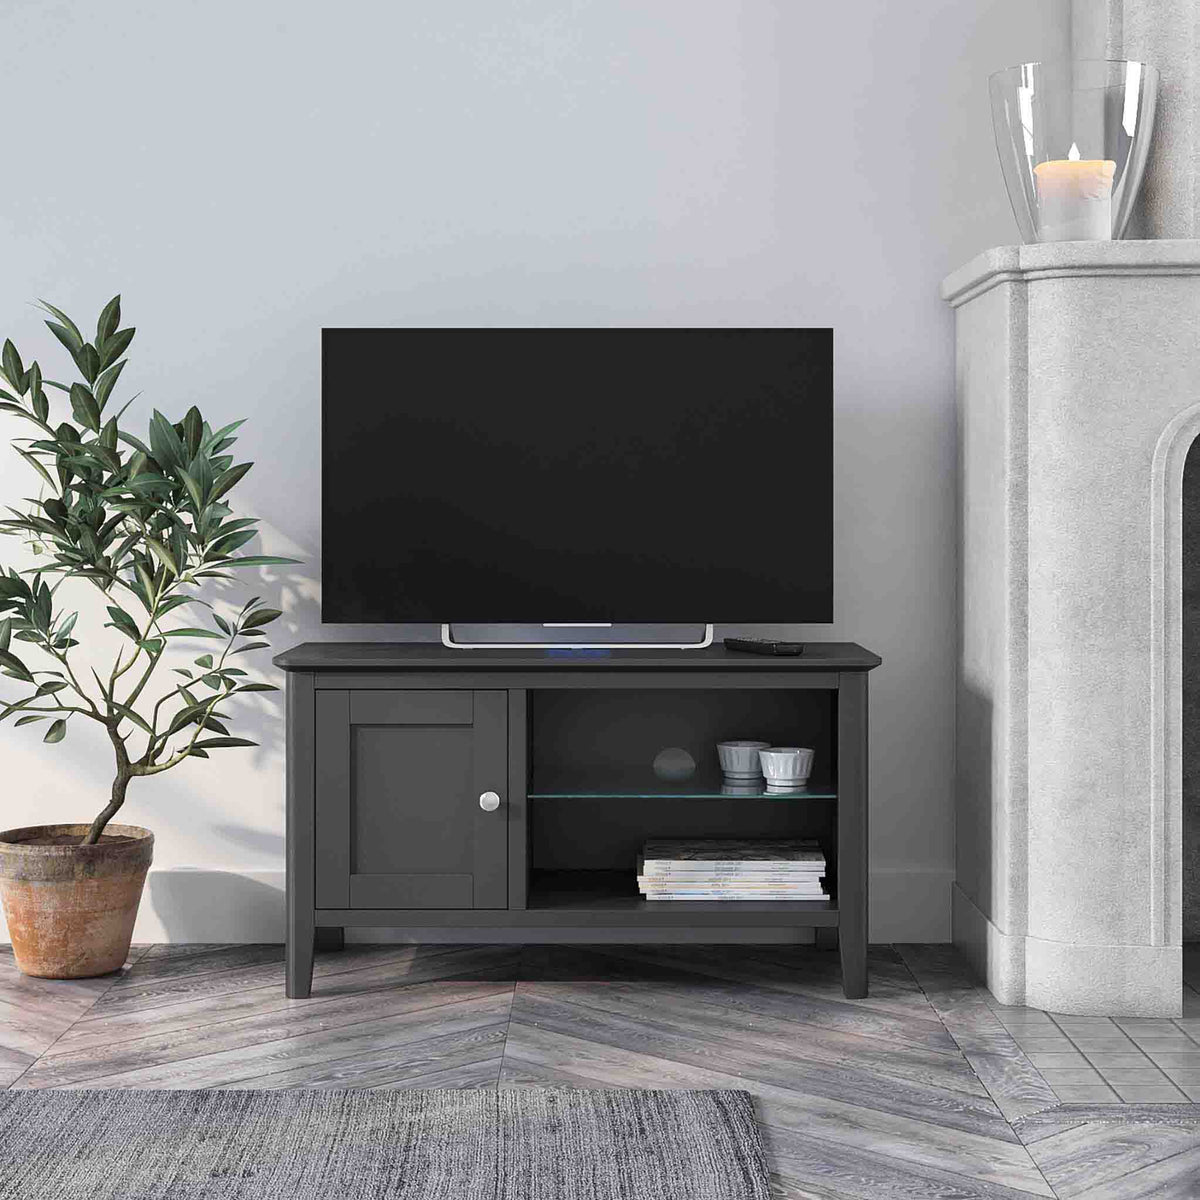 Lifestyle image of the Dumbarton Charcoal Grey Small 90cm TV Unit Media Stand